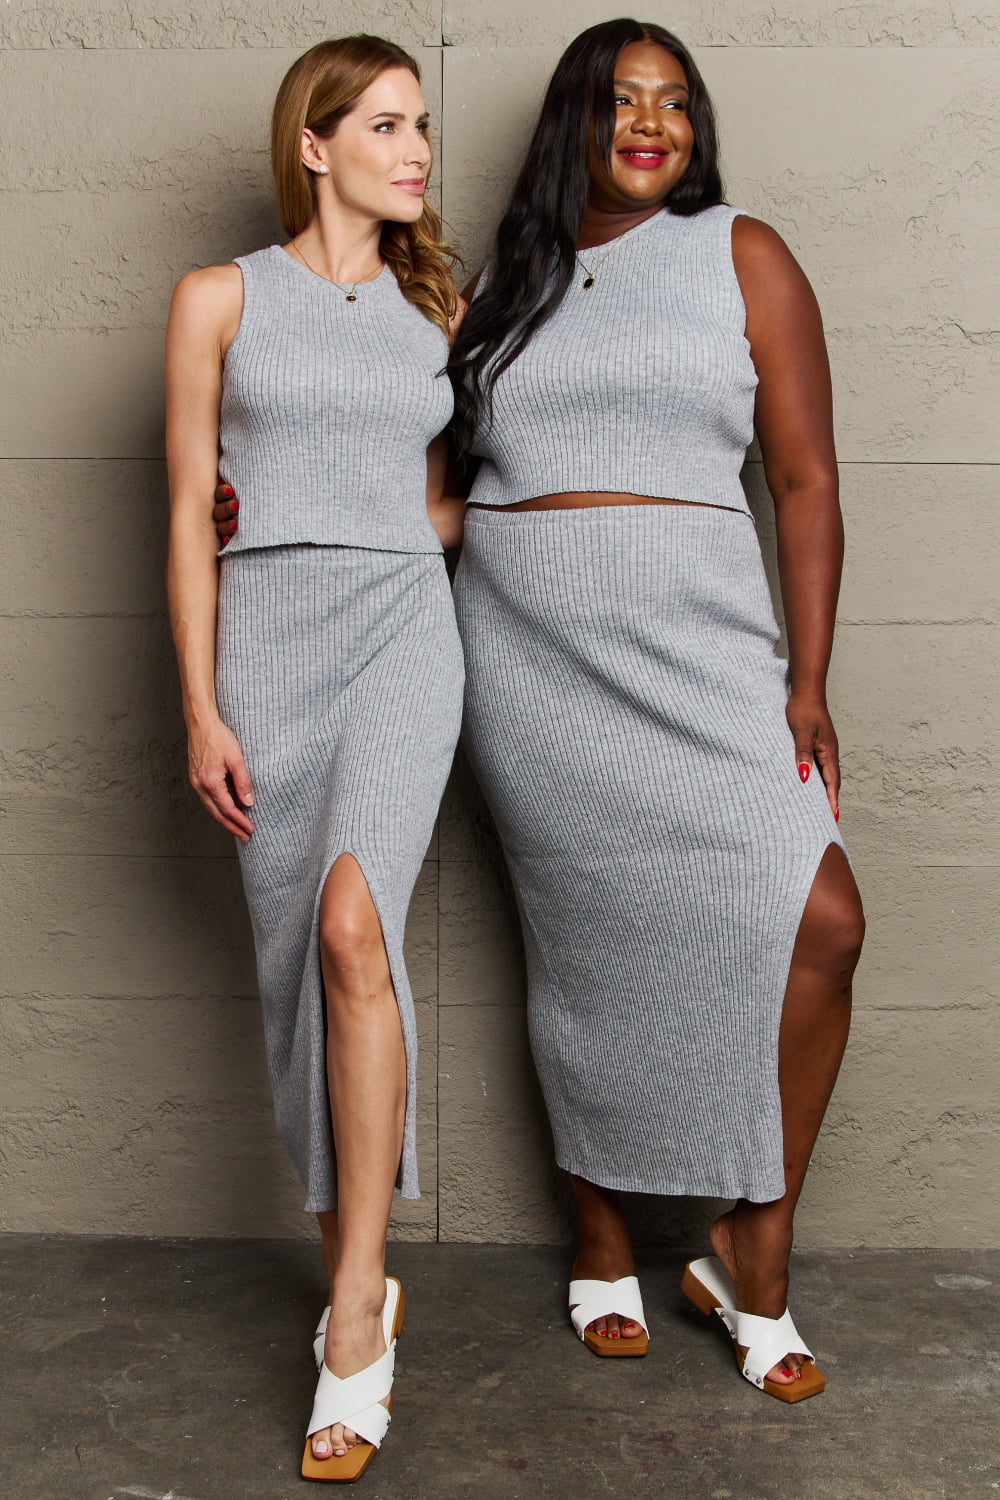 Sew In Love She's All That Fitted Two-Piece Skirt Set - LoveandModesty